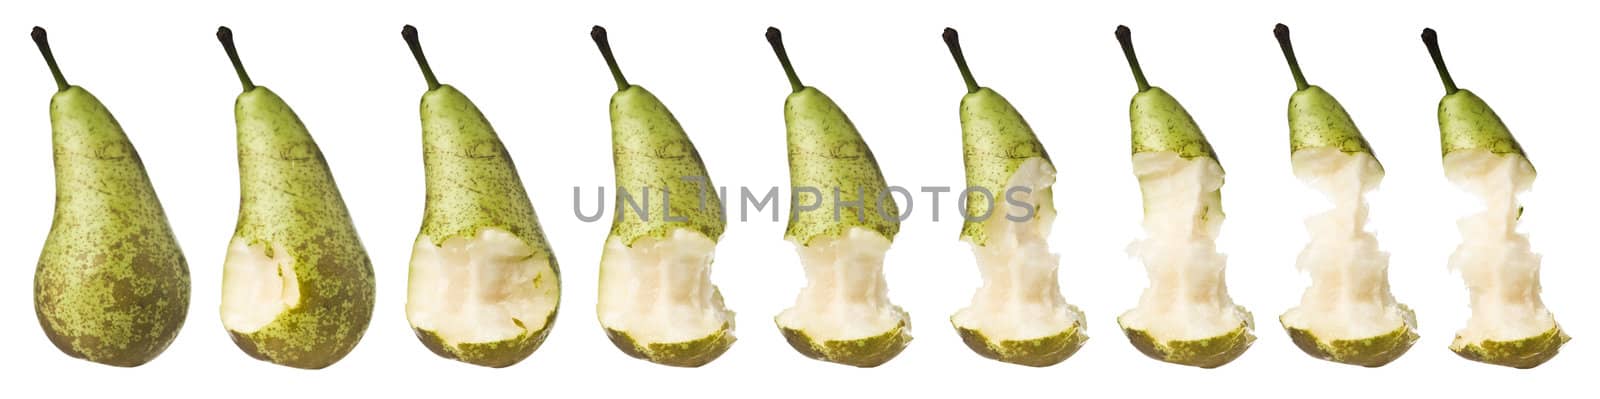 Pear in progrss isolated on white background